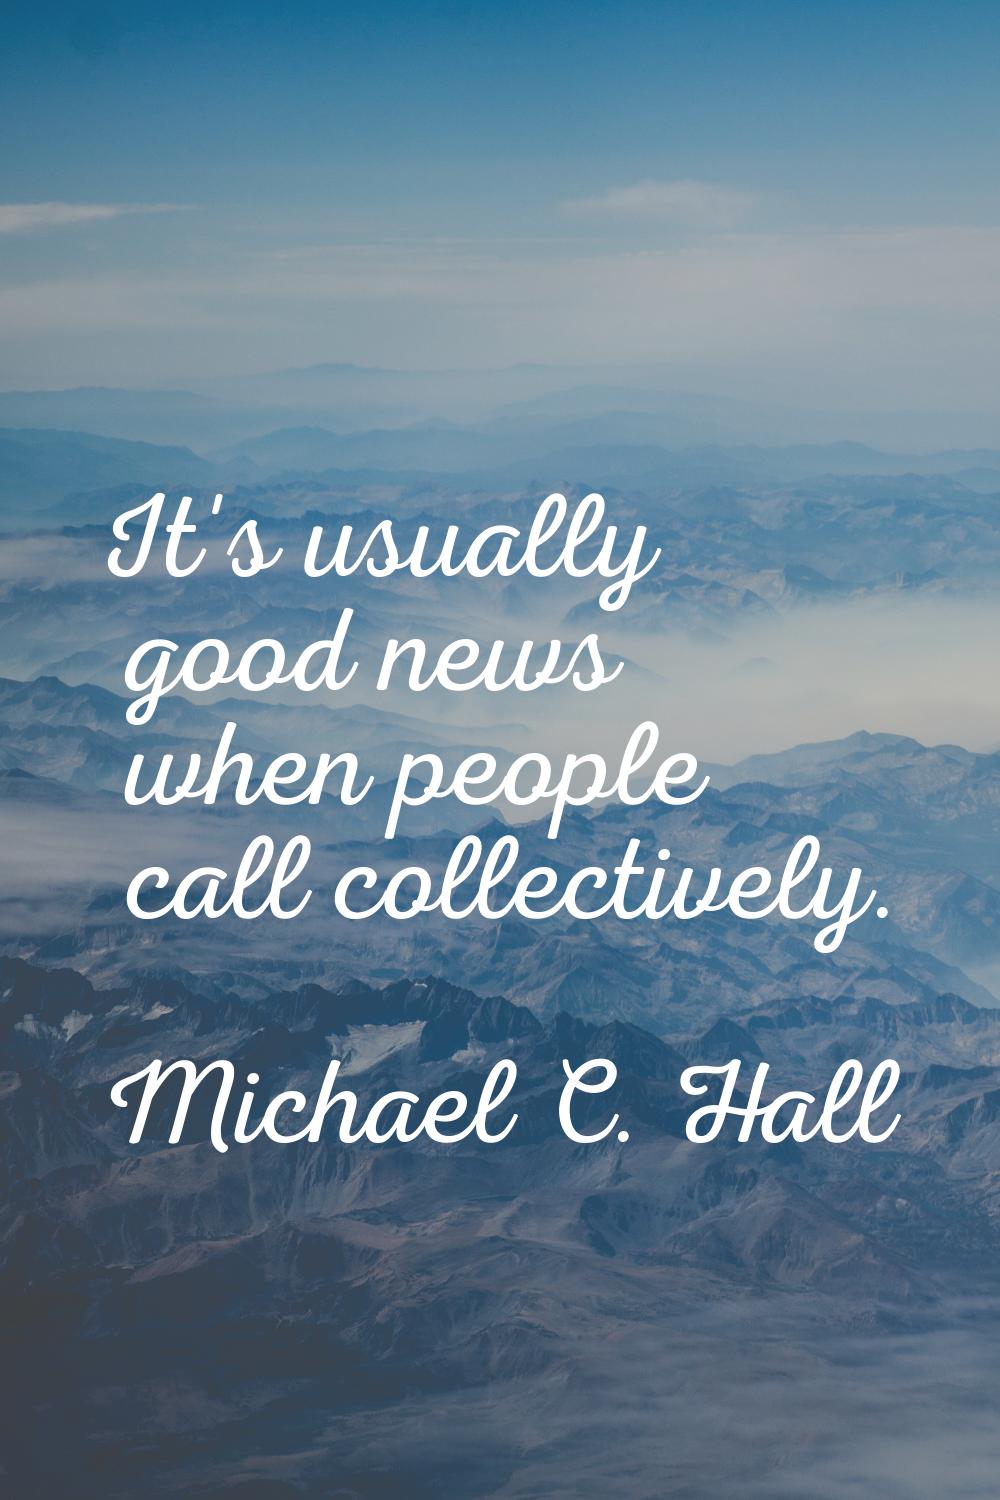 It's usually good news when people call collectively.